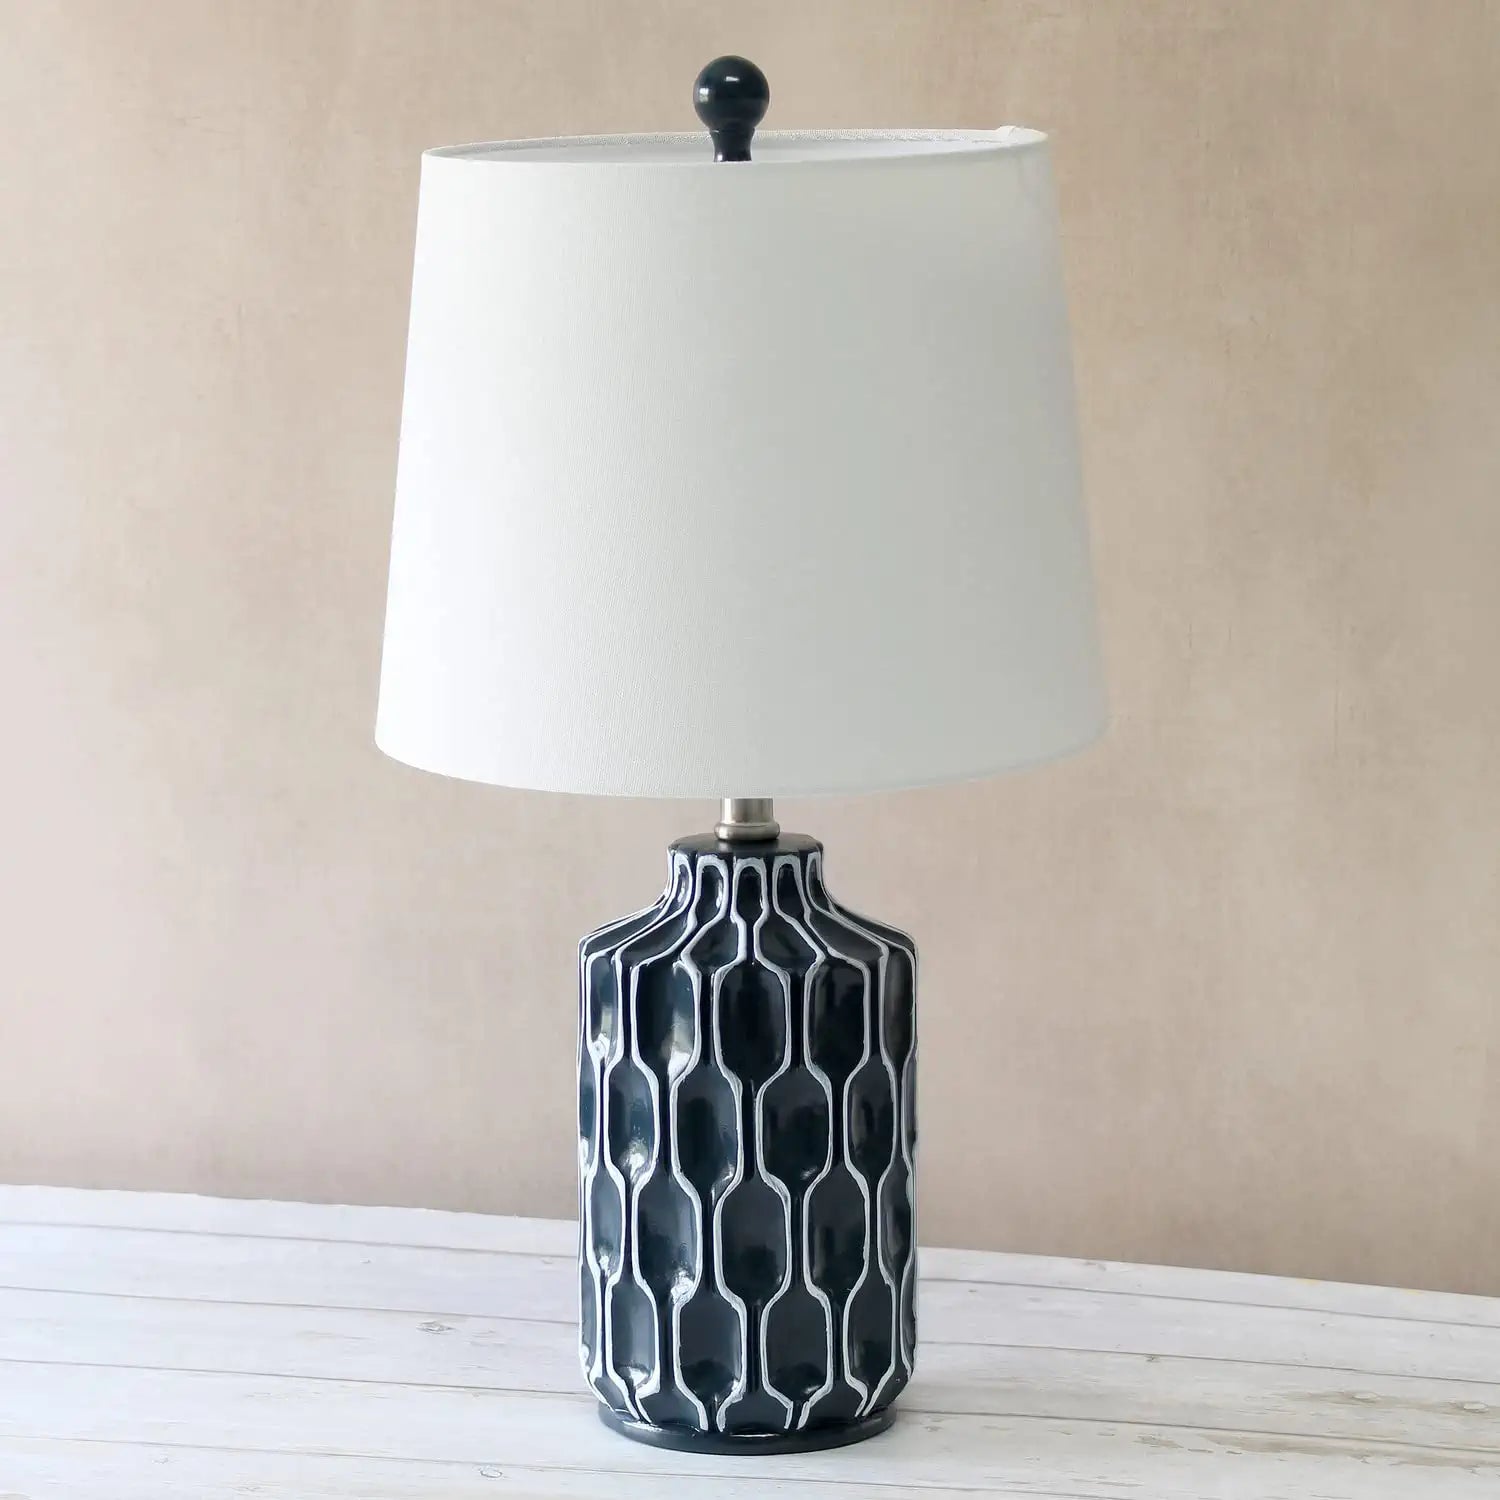 Lalia Home Contemporary Moroccan Table Lamp with Fabric White Shade - Blue